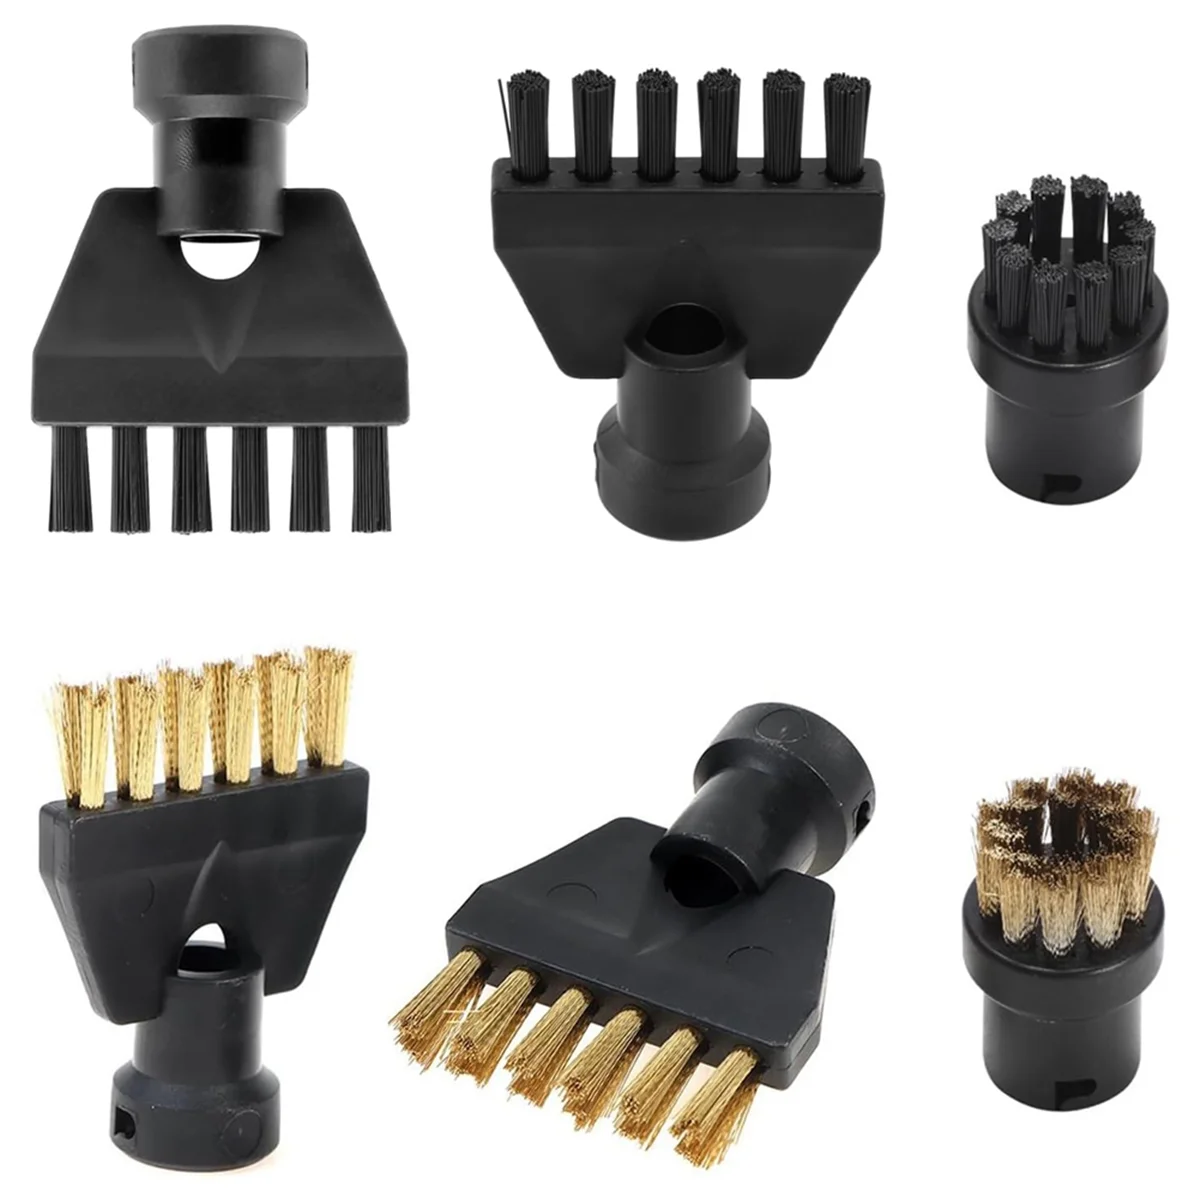 

Steam Cleaner Accessories for Karcher SC1 SC2 SC4 SC5, Brush Attachment Set Includes Round Brush Sets Flat Brush Heads